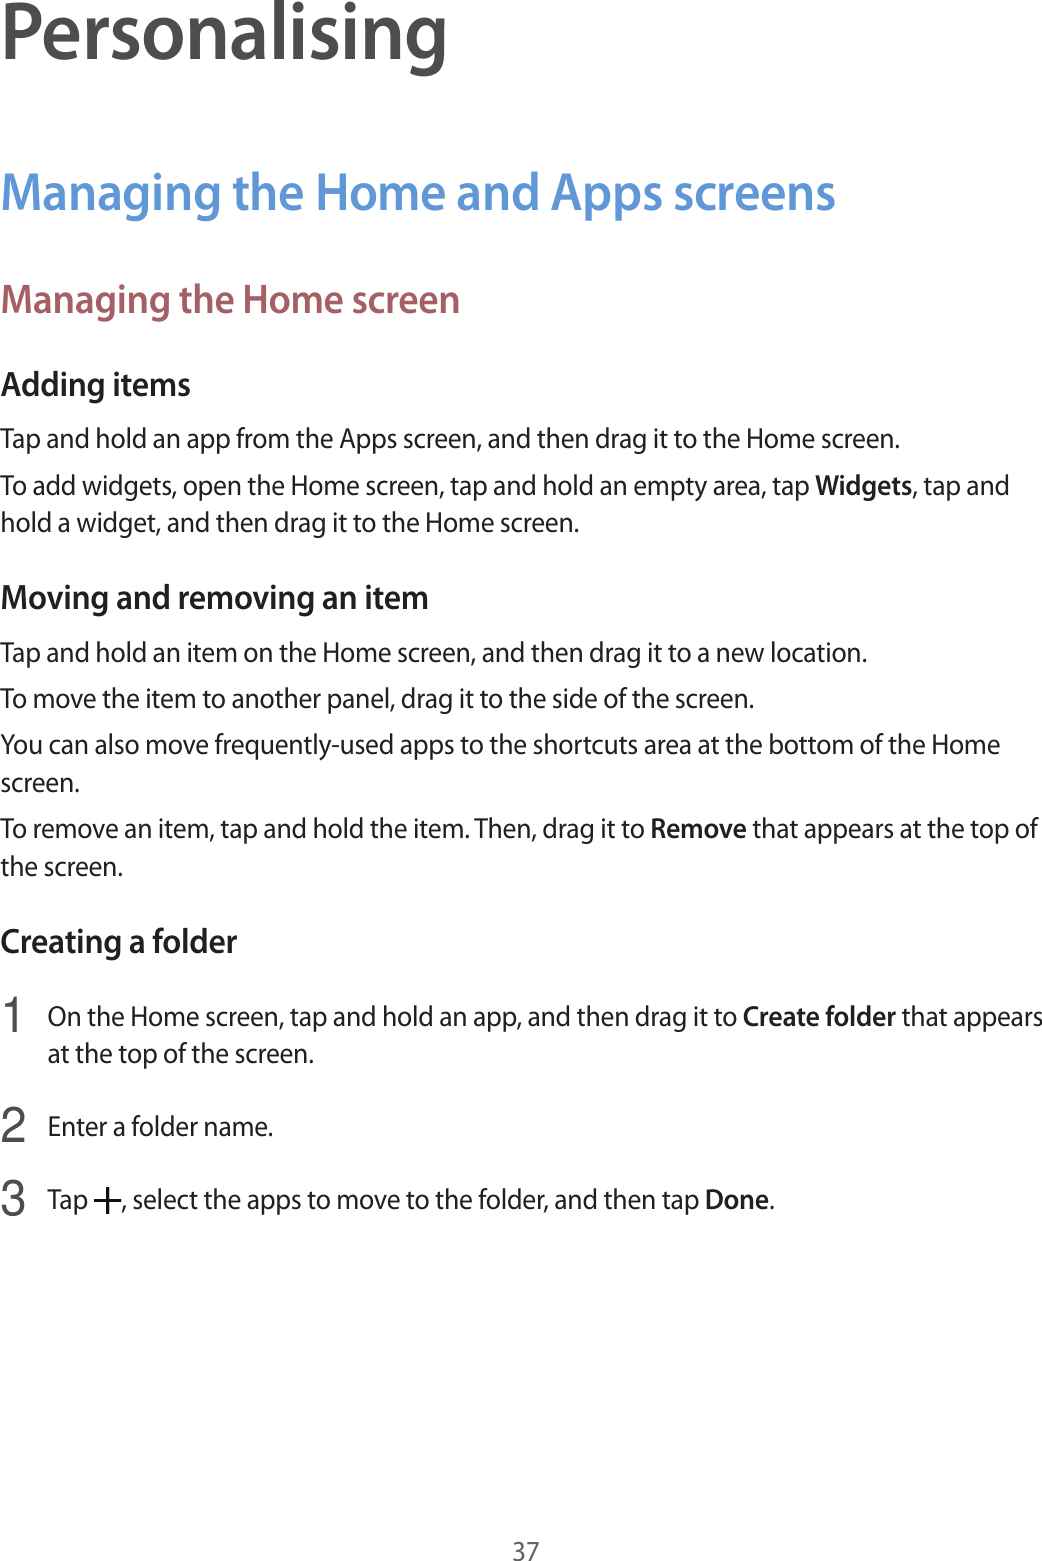 37PersonalisingManaging the Home and Apps screensManaging the Home screenAdding itemsTap and hold an app from the Apps screen, and then drag it to the Home screen.To add widgets, open the Home screen, tap and hold an empty area, tap Widgets, tap and hold a widget, and then drag it to the Home screen.Moving and removing an itemTap and hold an item on the Home screen, and then drag it to a new location.To move the item to another panel, drag it to the side of the screen.You can also move frequently-used apps to the shortcuts area at the bottom of the Home screen.To remove an item, tap and hold the item. Then, drag it to Remove that appears at the top of the screen.Creating a folder1  On the Home screen, tap and hold an app, and then drag it to Create folder that appears at the top of the screen.2  Enter a folder name.3  Tap  , select the apps to move to the folder, and then tap Done.